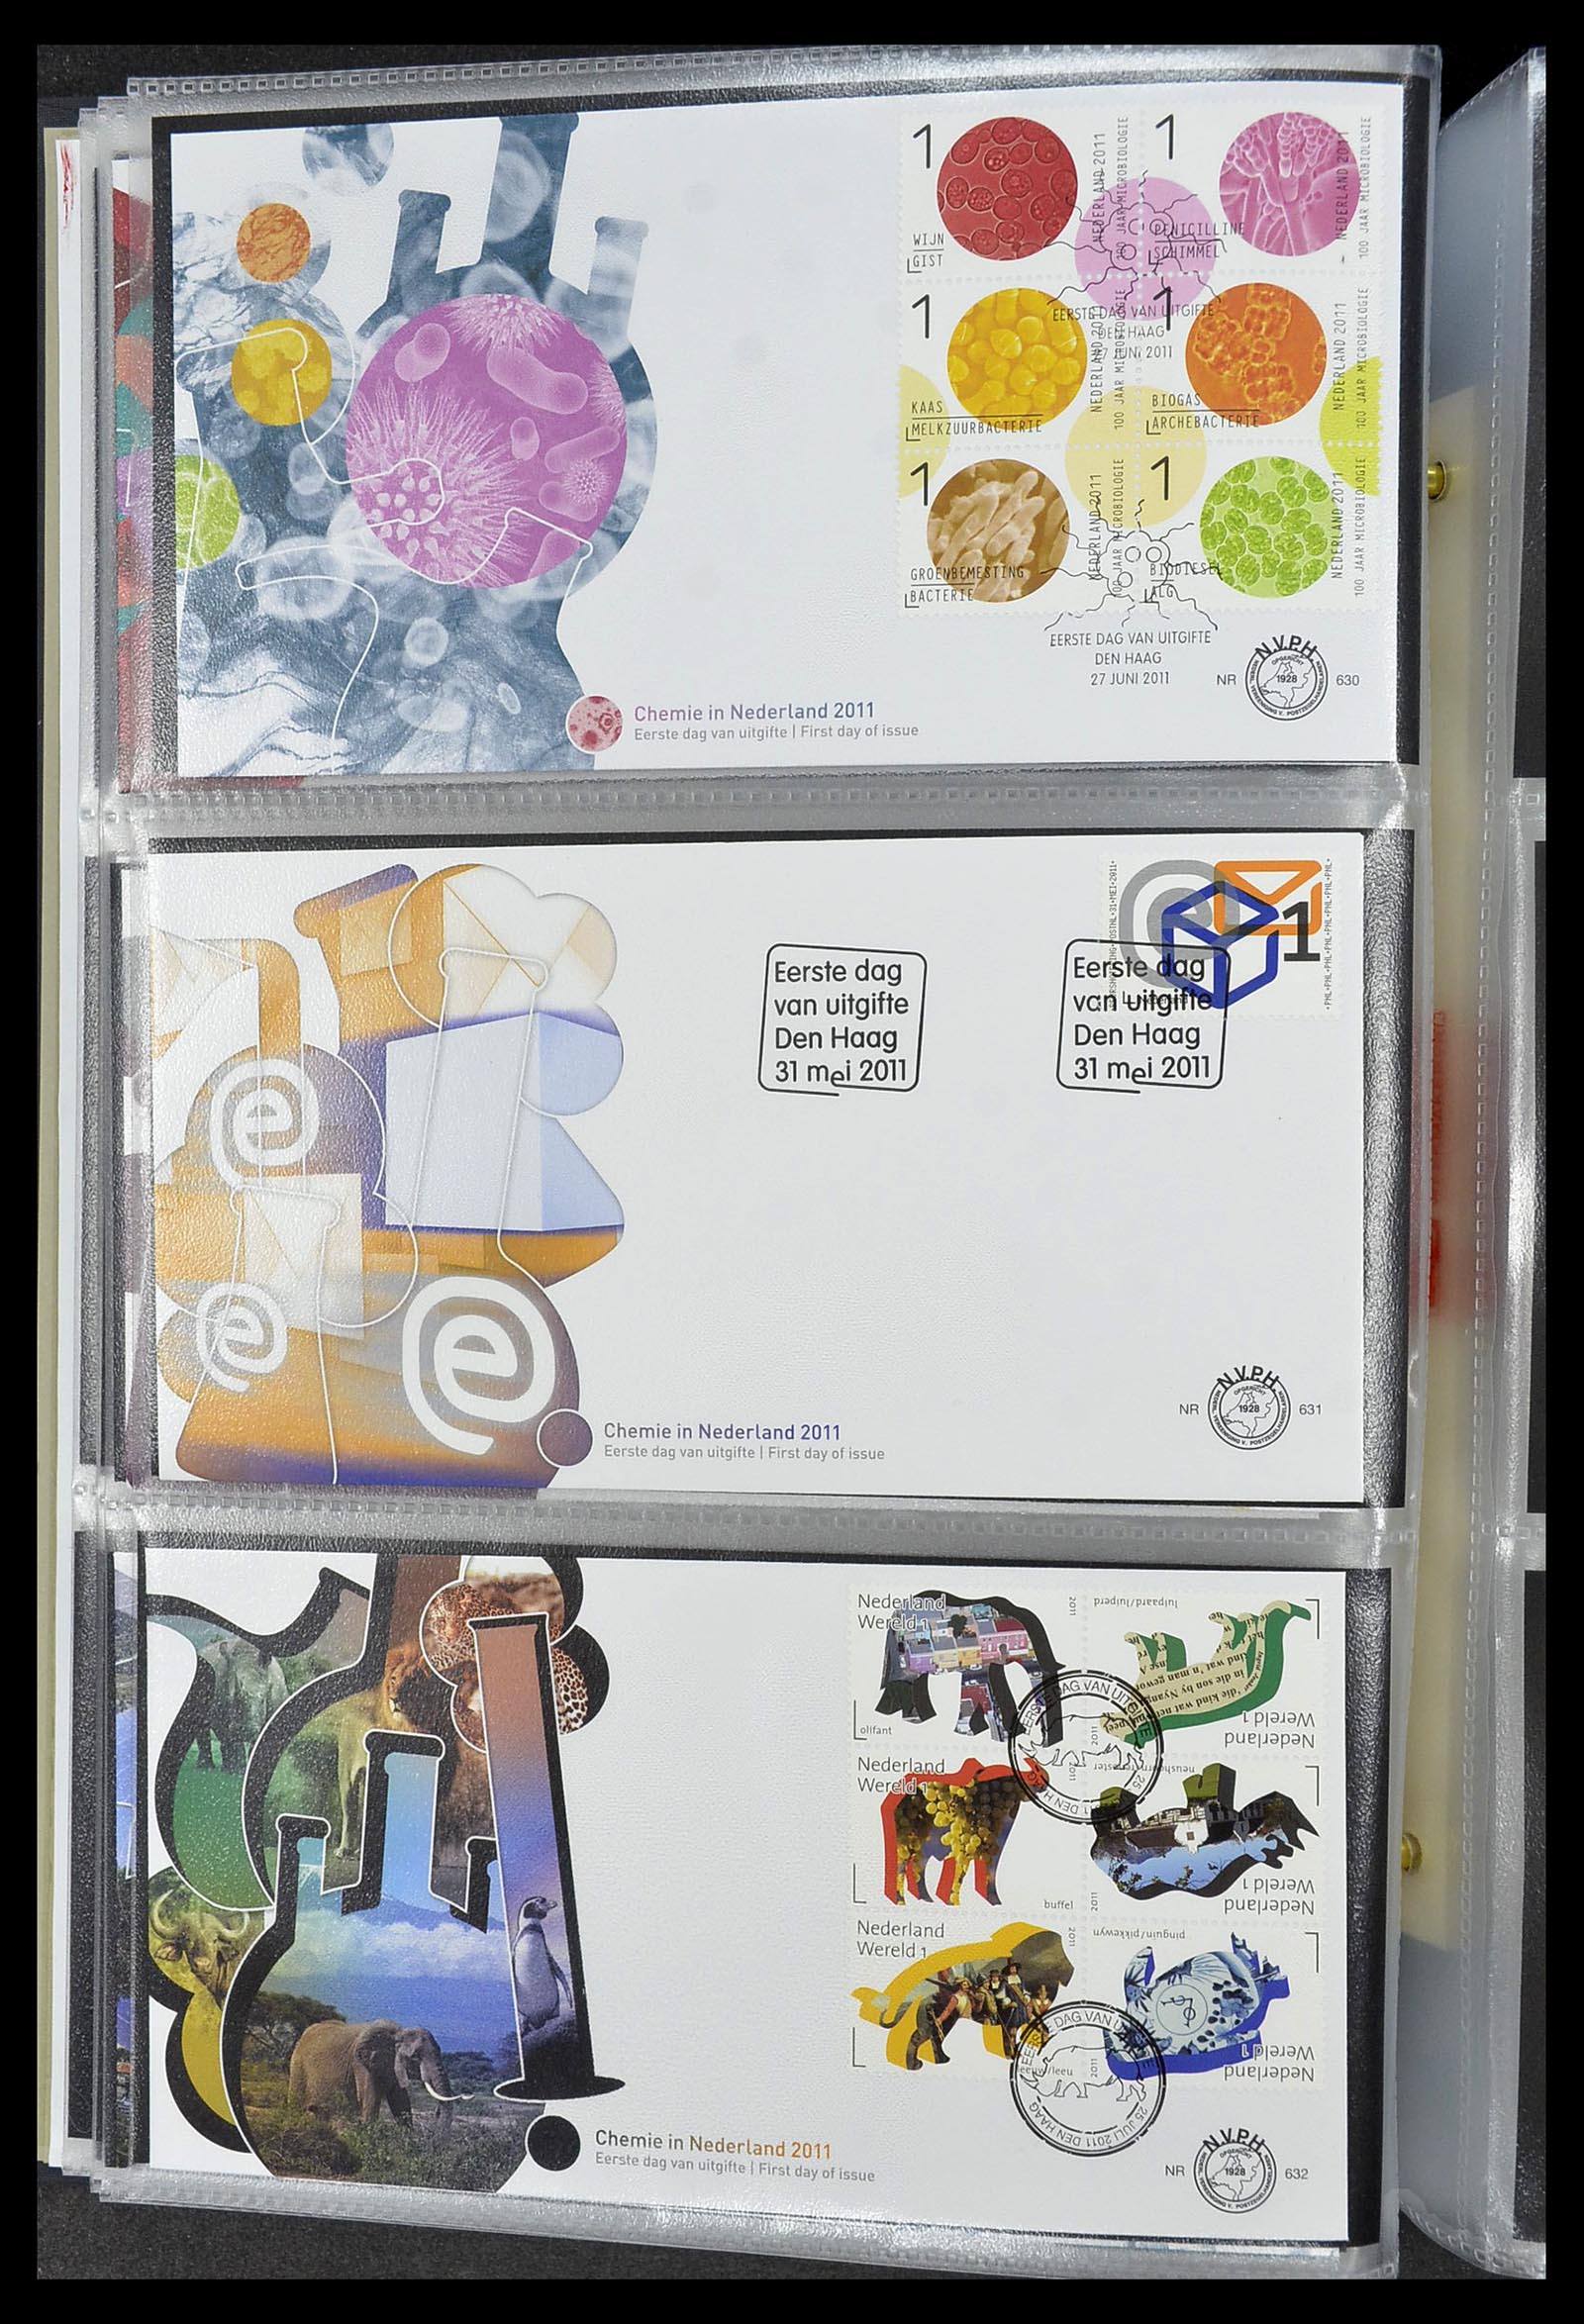 29666 153 - 29666 Netherlands 1997-2011 FDC's.